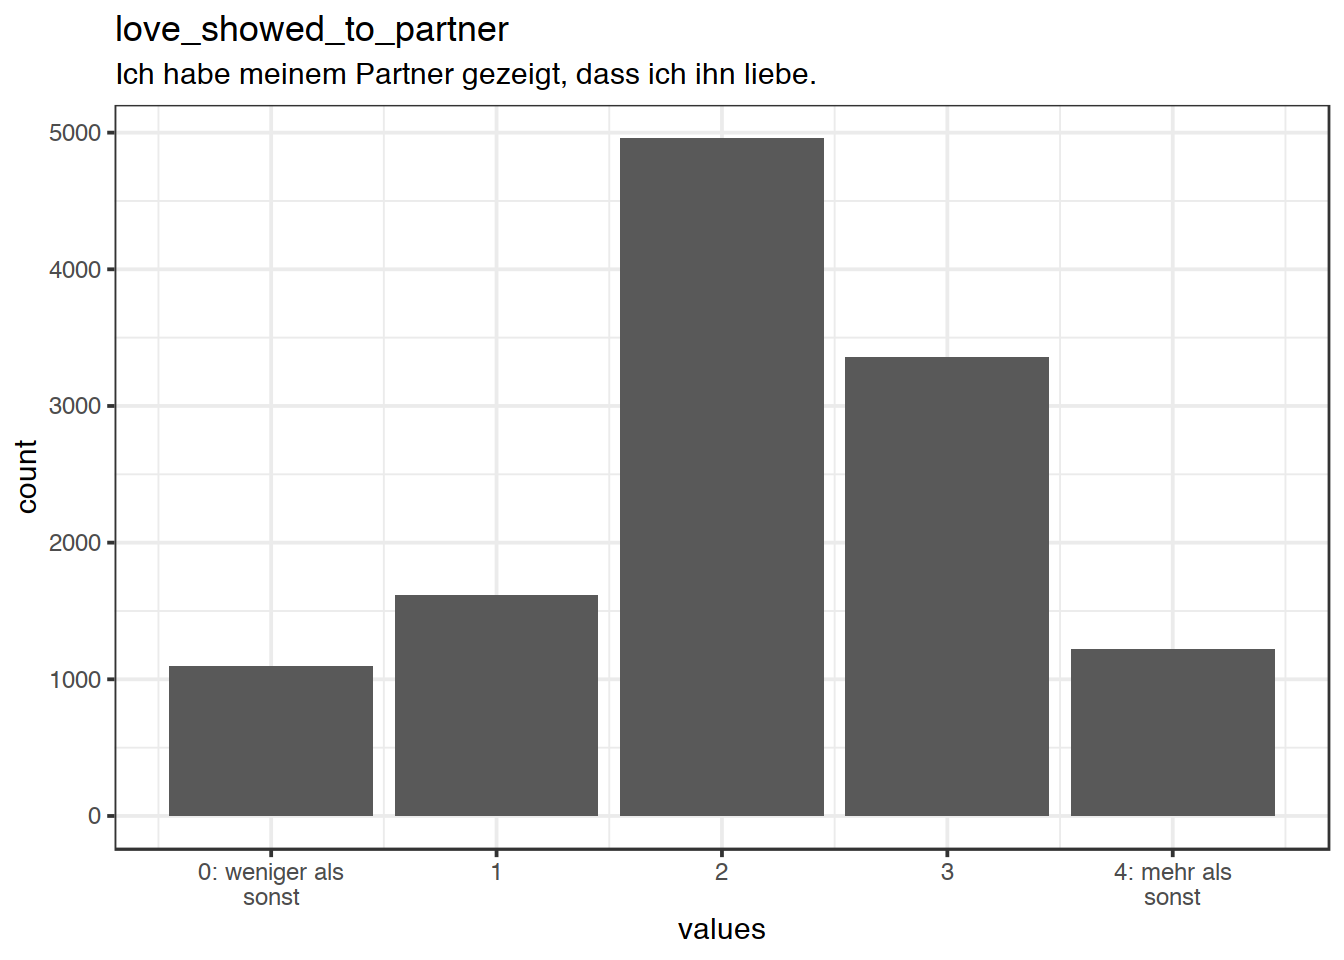 Distribution of values for love_showed_to_partner